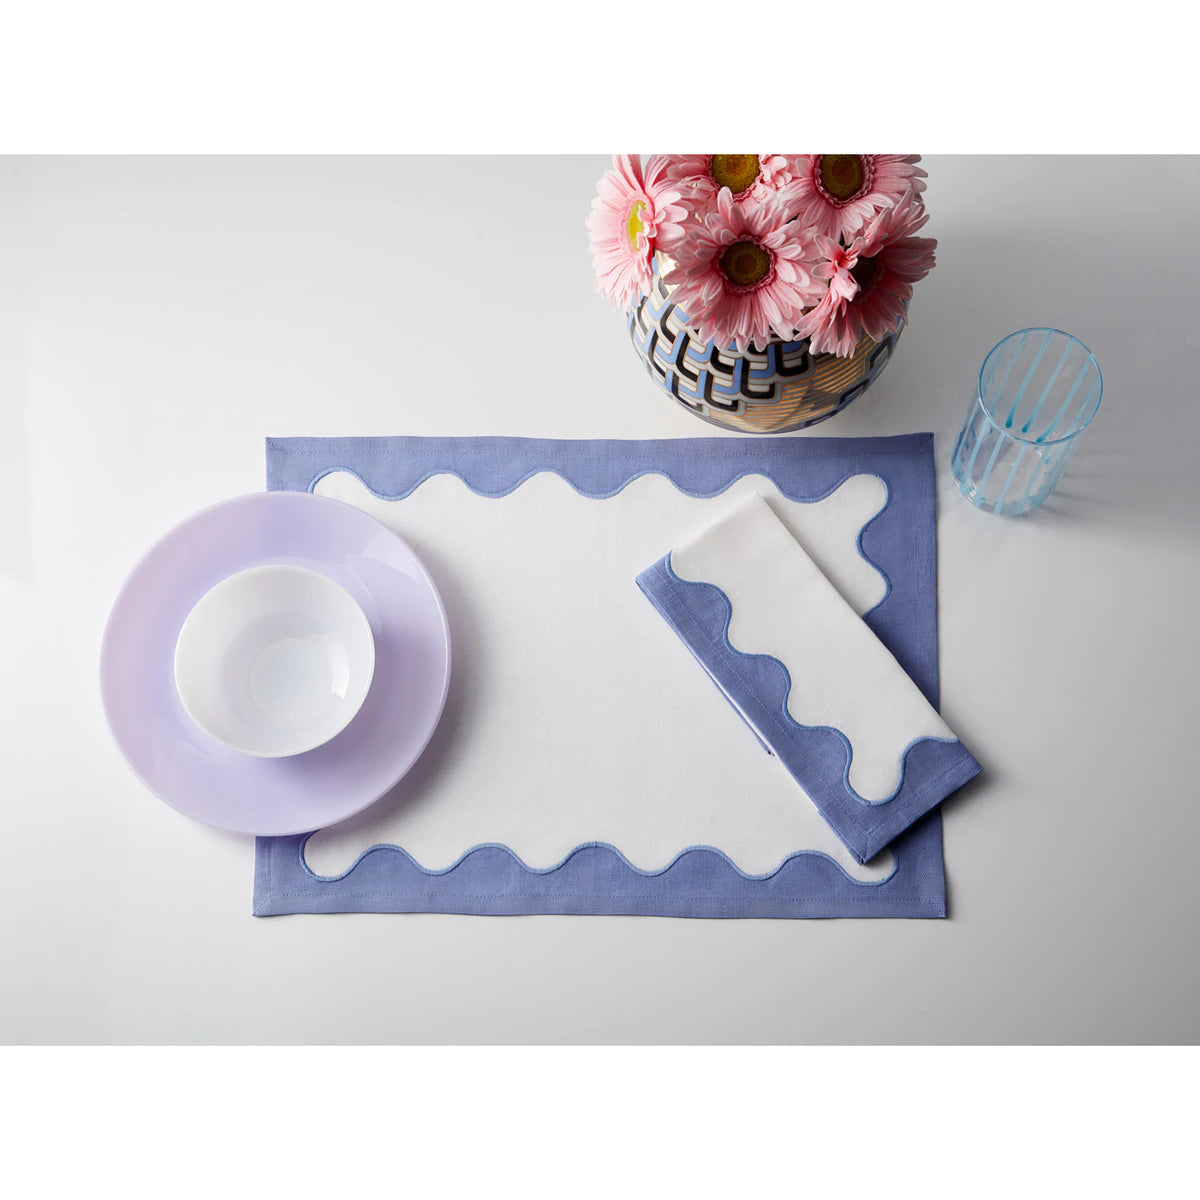 Ripple Placemat Set (4) by Jonathan Adler